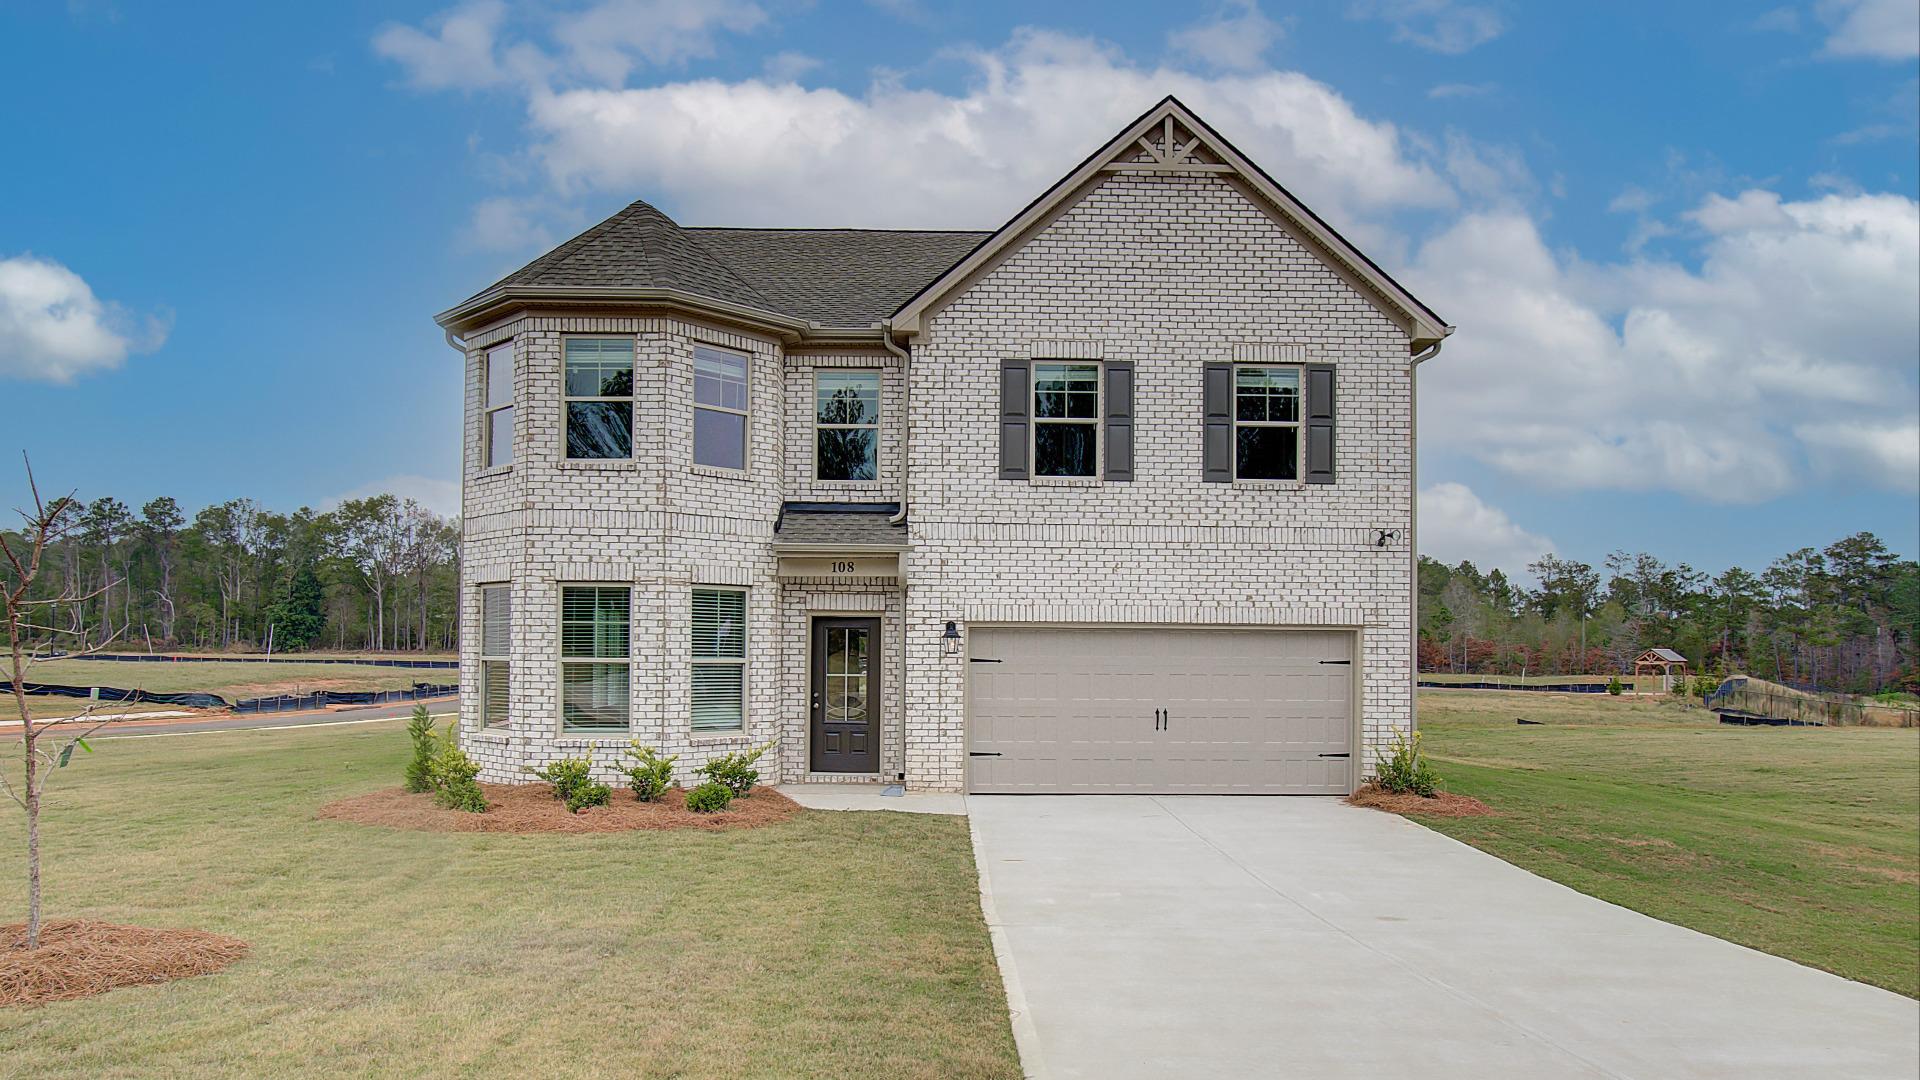 Single Family New Construction Home DRB Homes